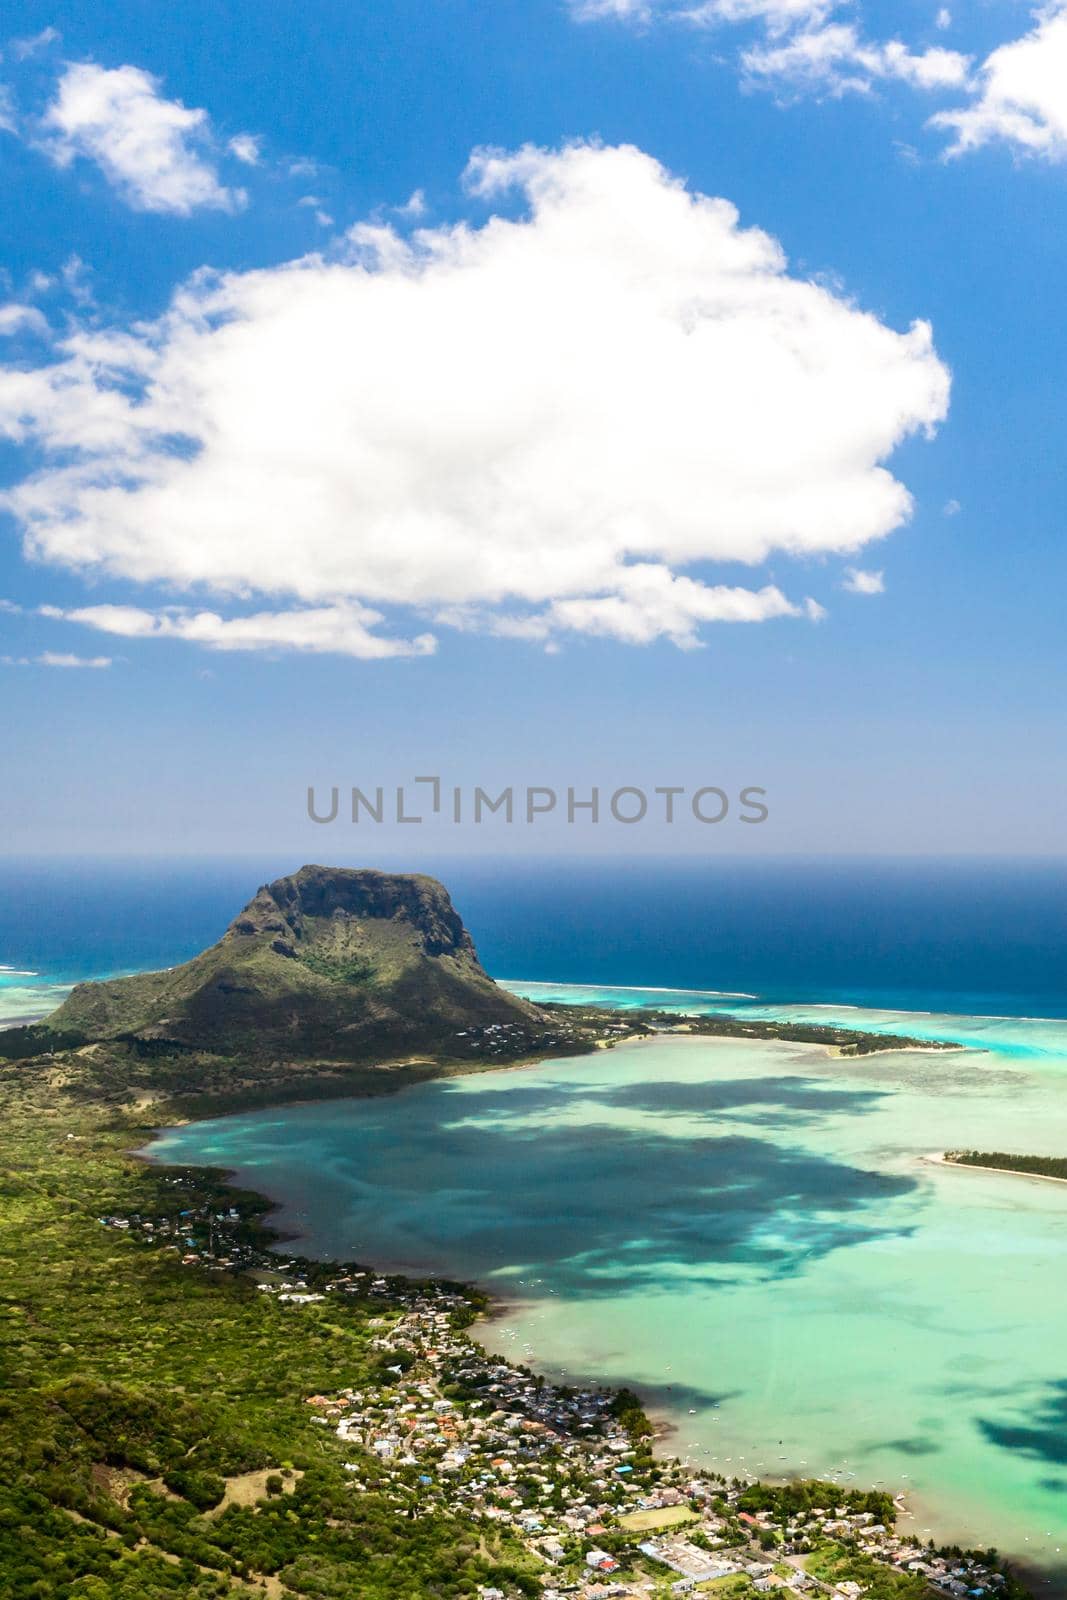 Bird's eye view of Mount Le Morne Brabant on the island of Mauritius by Lobachad